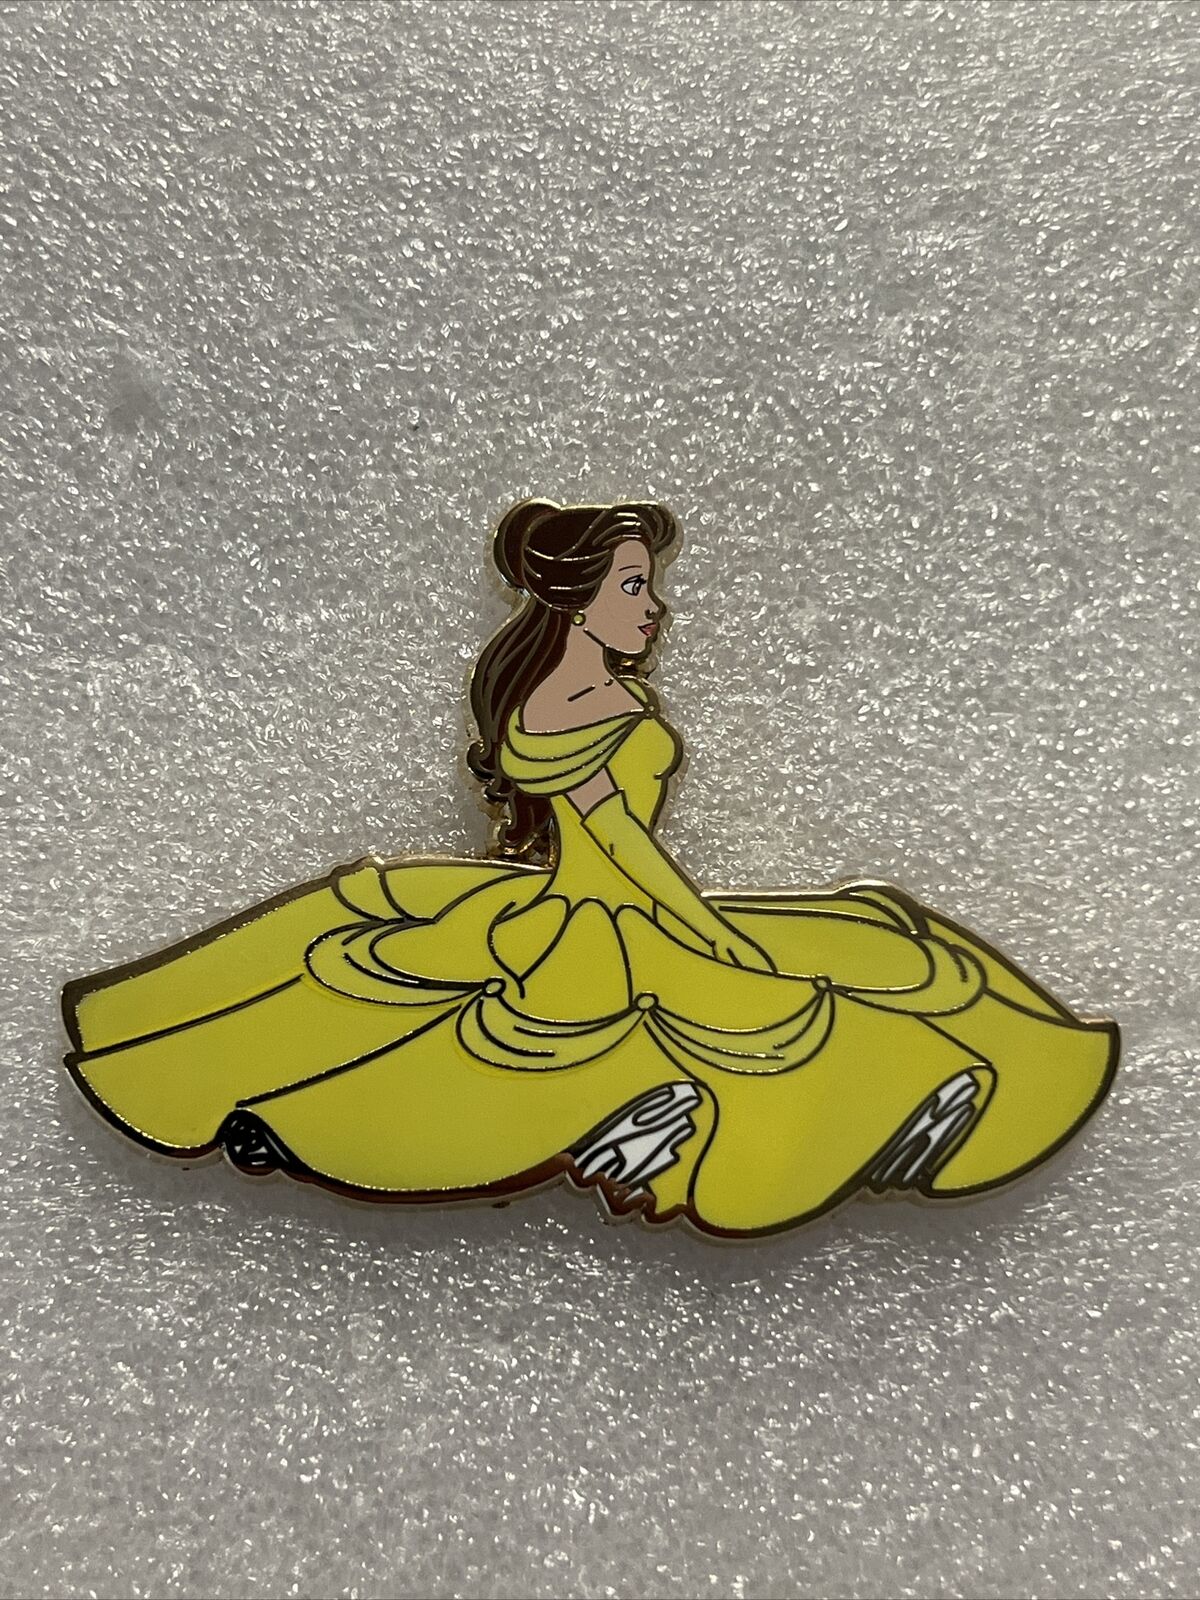 DaVinci Fantasy Pins - Royal Beauties - Belle - Limited Edition 75 - F/S